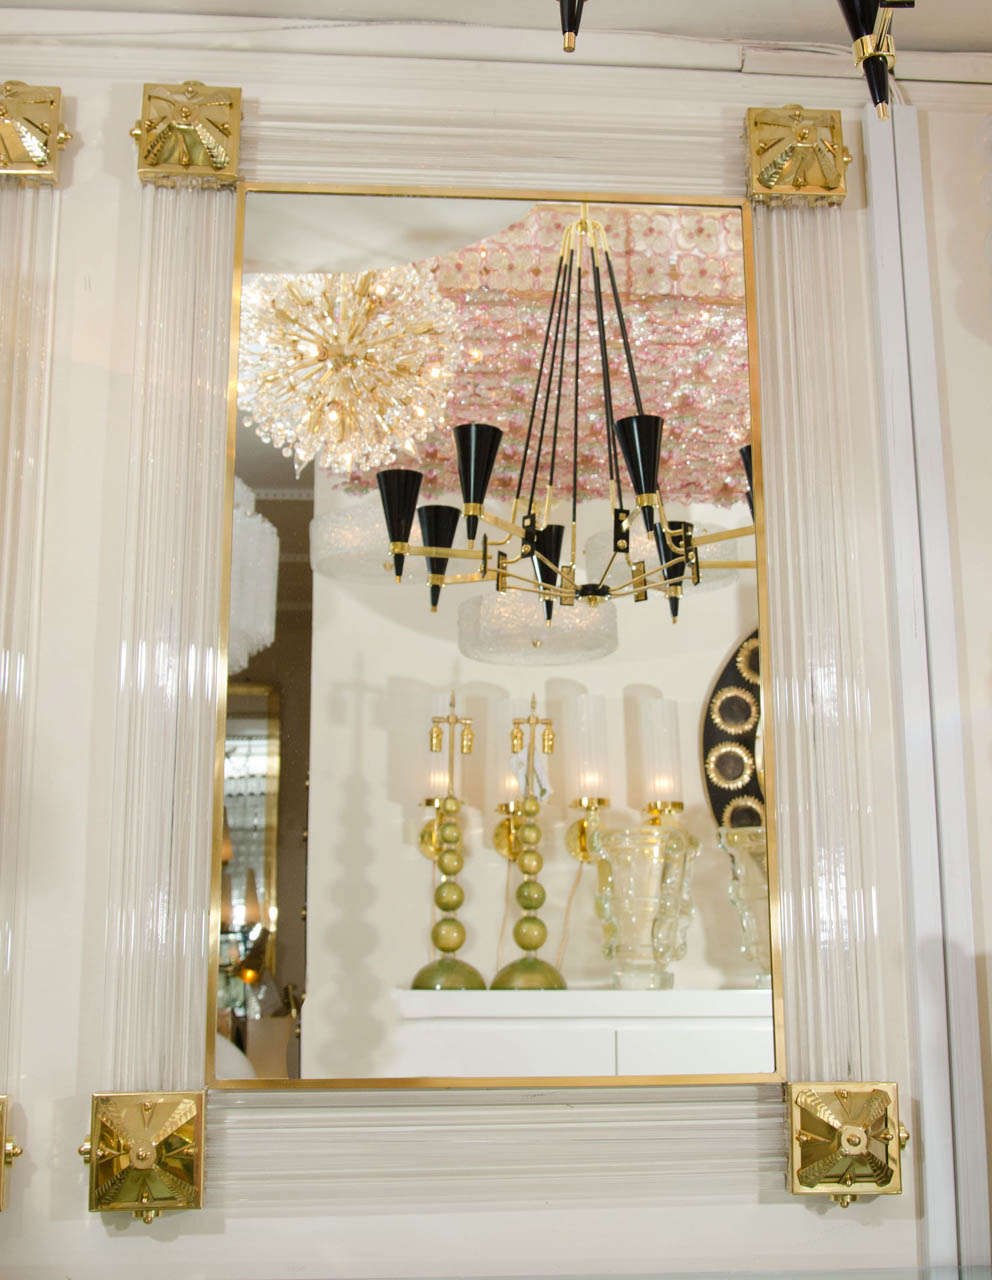 Rectangular mirror with fluted glass surround and brass decorative details by Barovier.